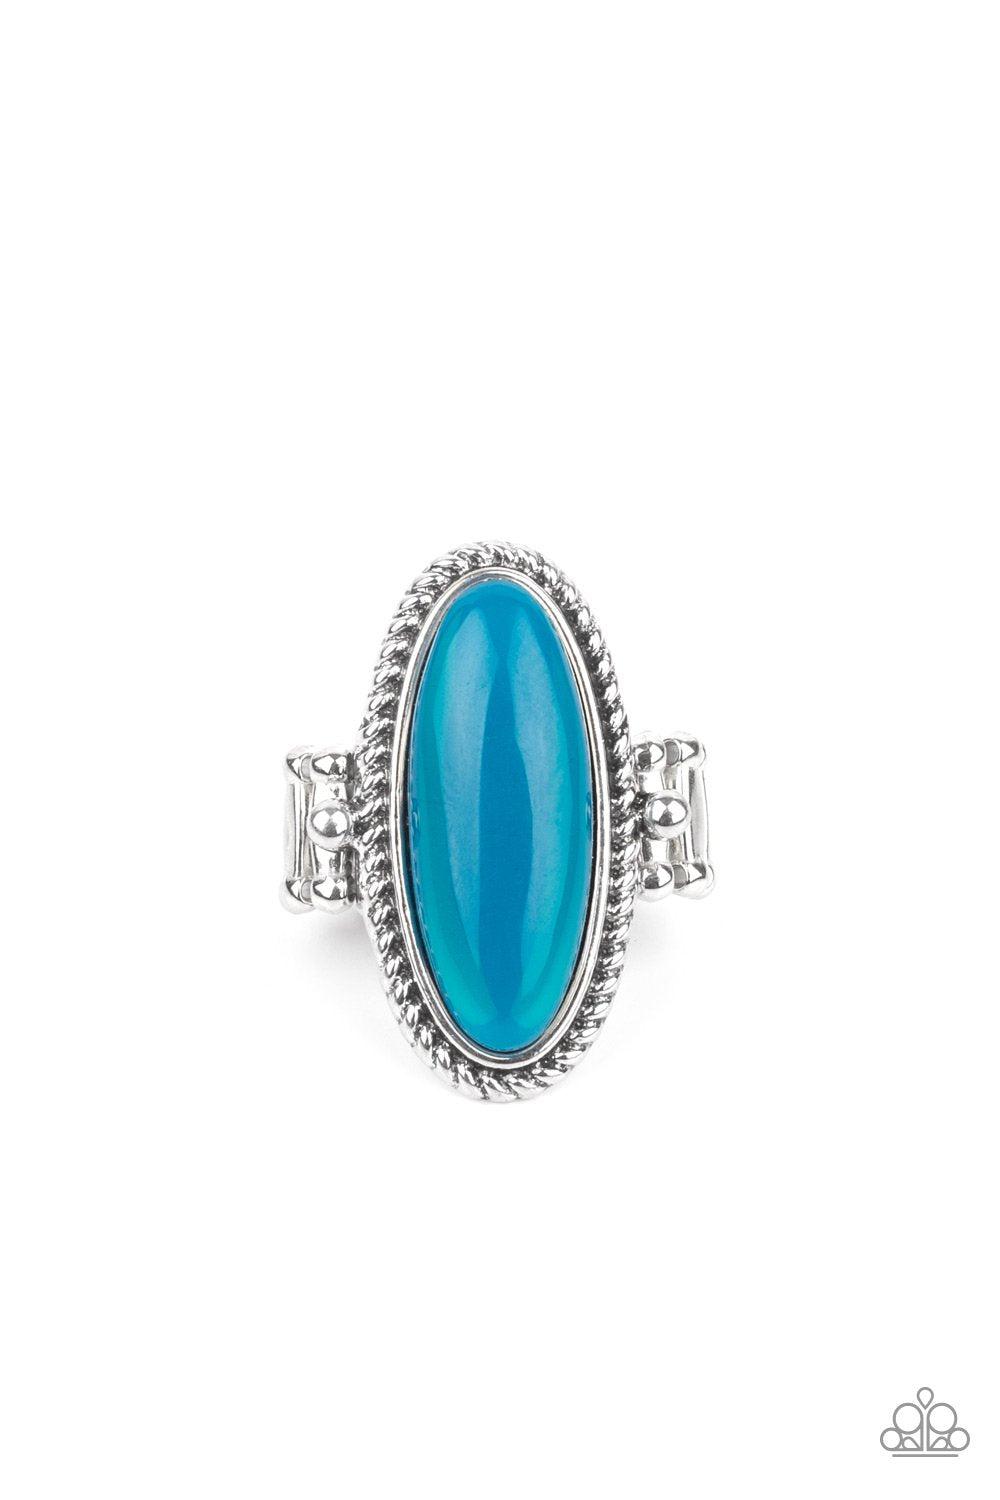 Oval Oasis Blue Iridescent Acrylic Ring - Paparazzi Accessories- lightbox - CarasShop.com - $5 Jewelry by Cara Jewels